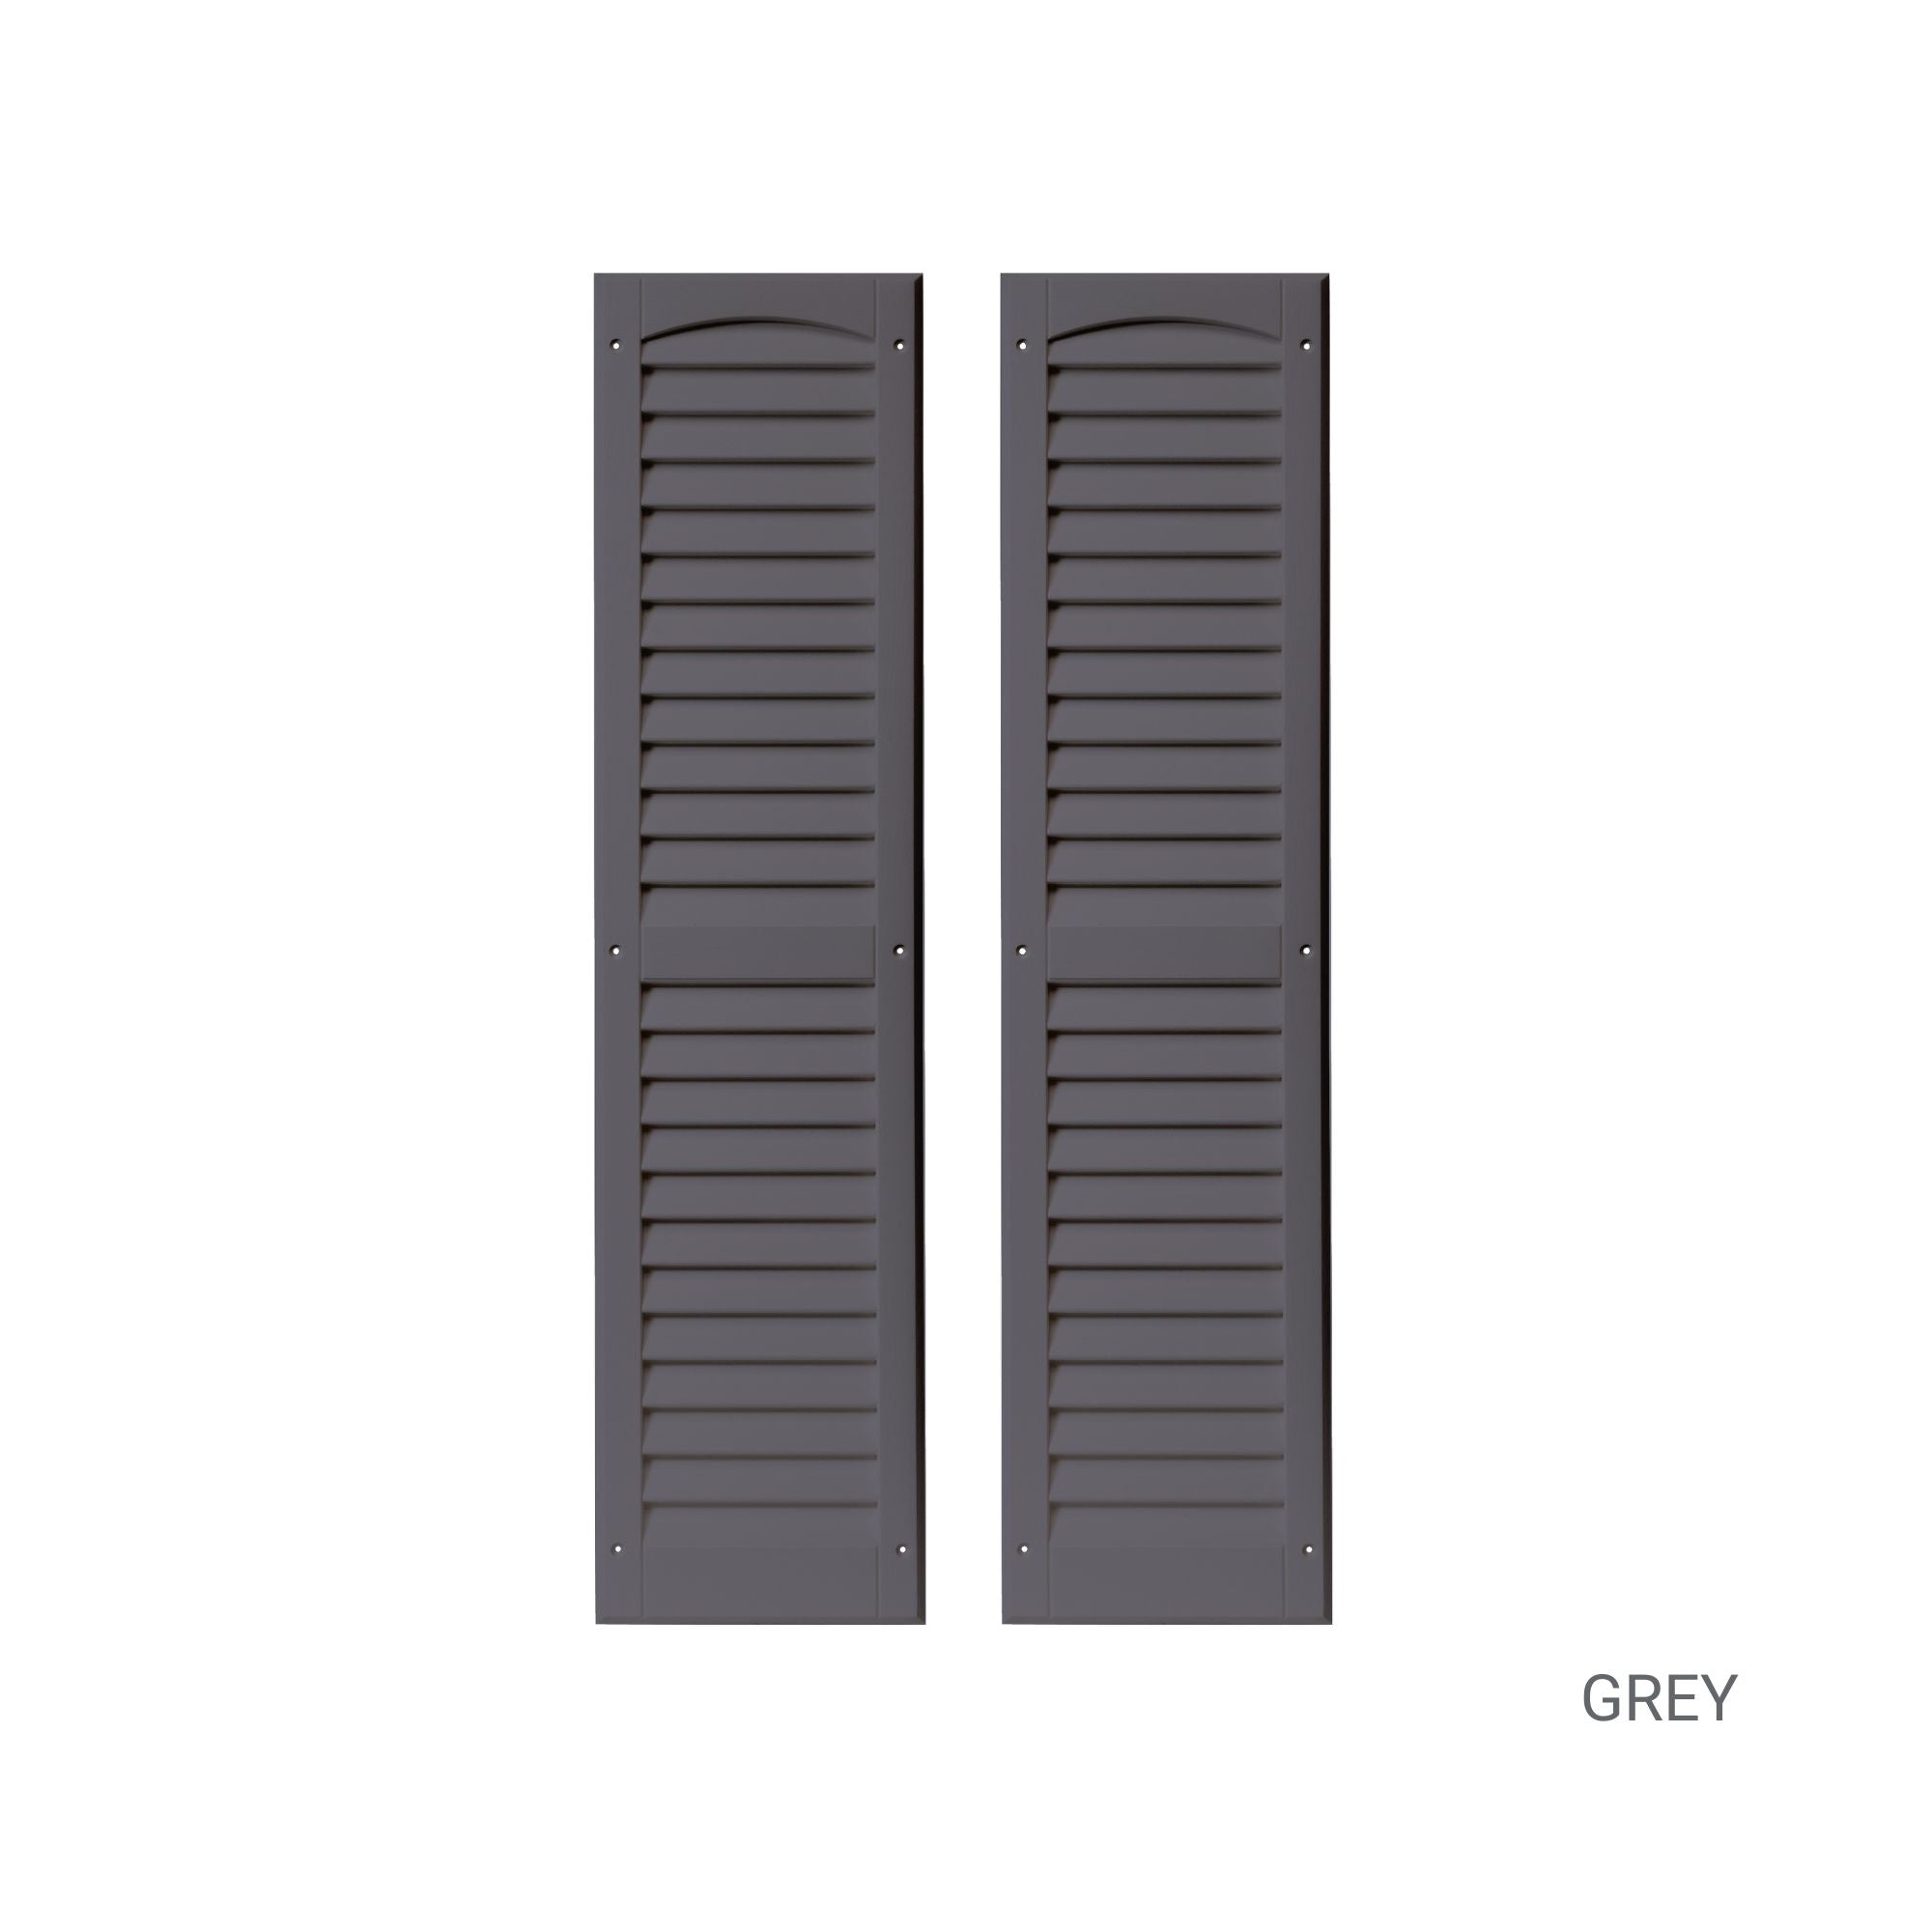 Pair of 9" W x 36" H Louvered Grey Shutters for Sheds, Playhouses, and MORE